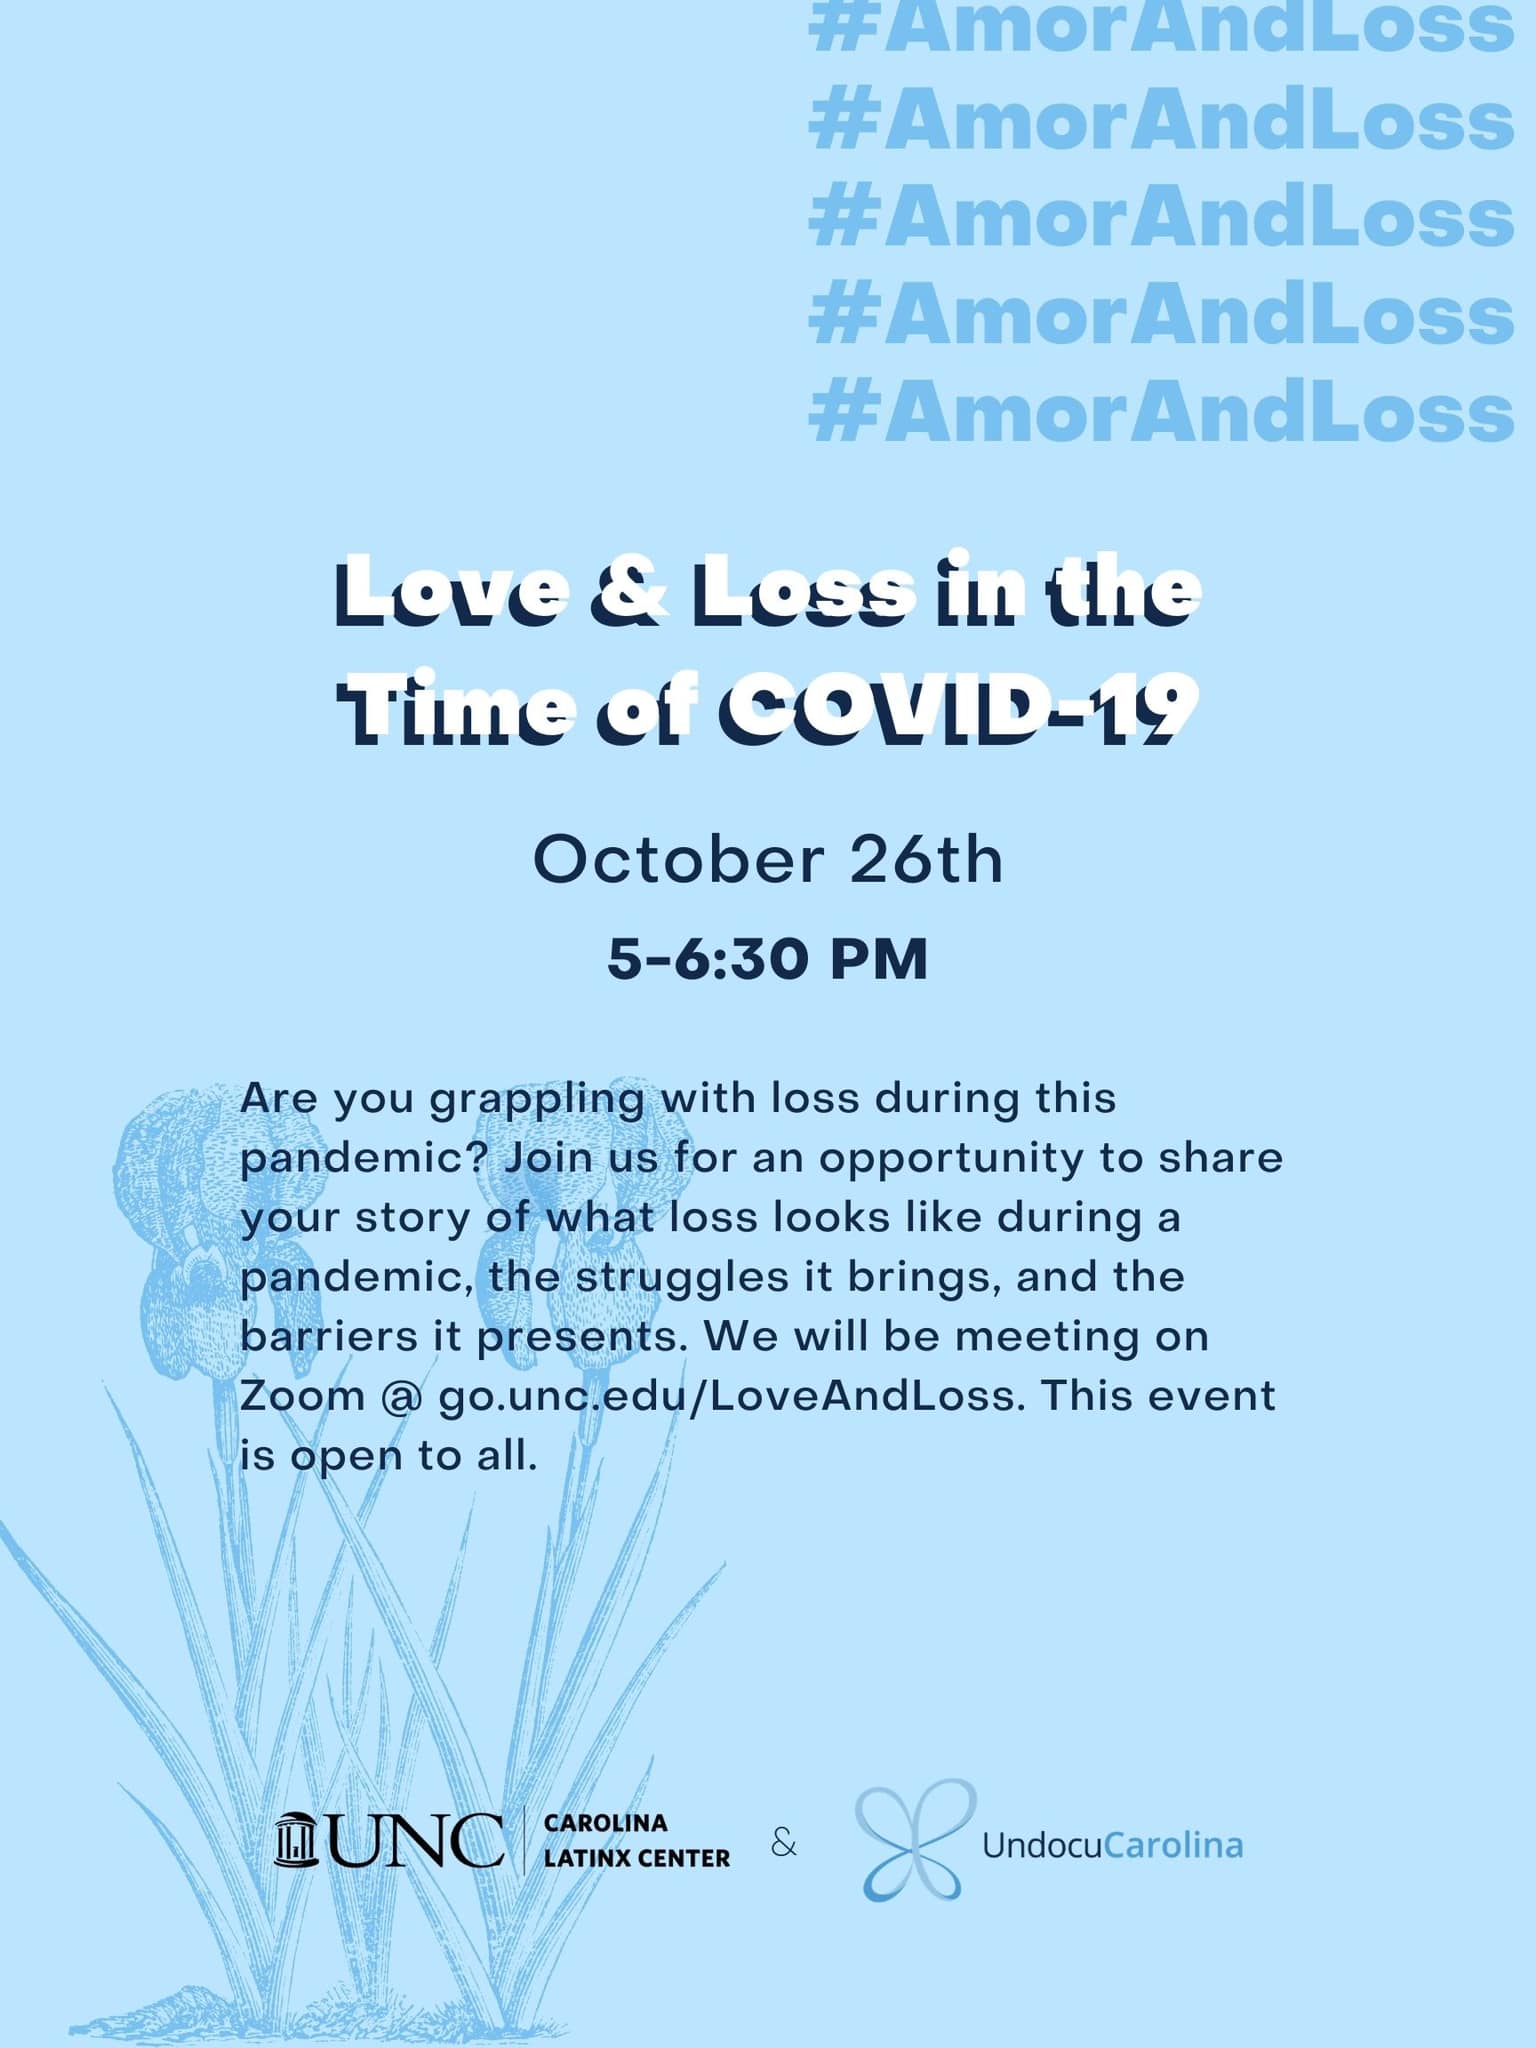 Love and Loss event flyer